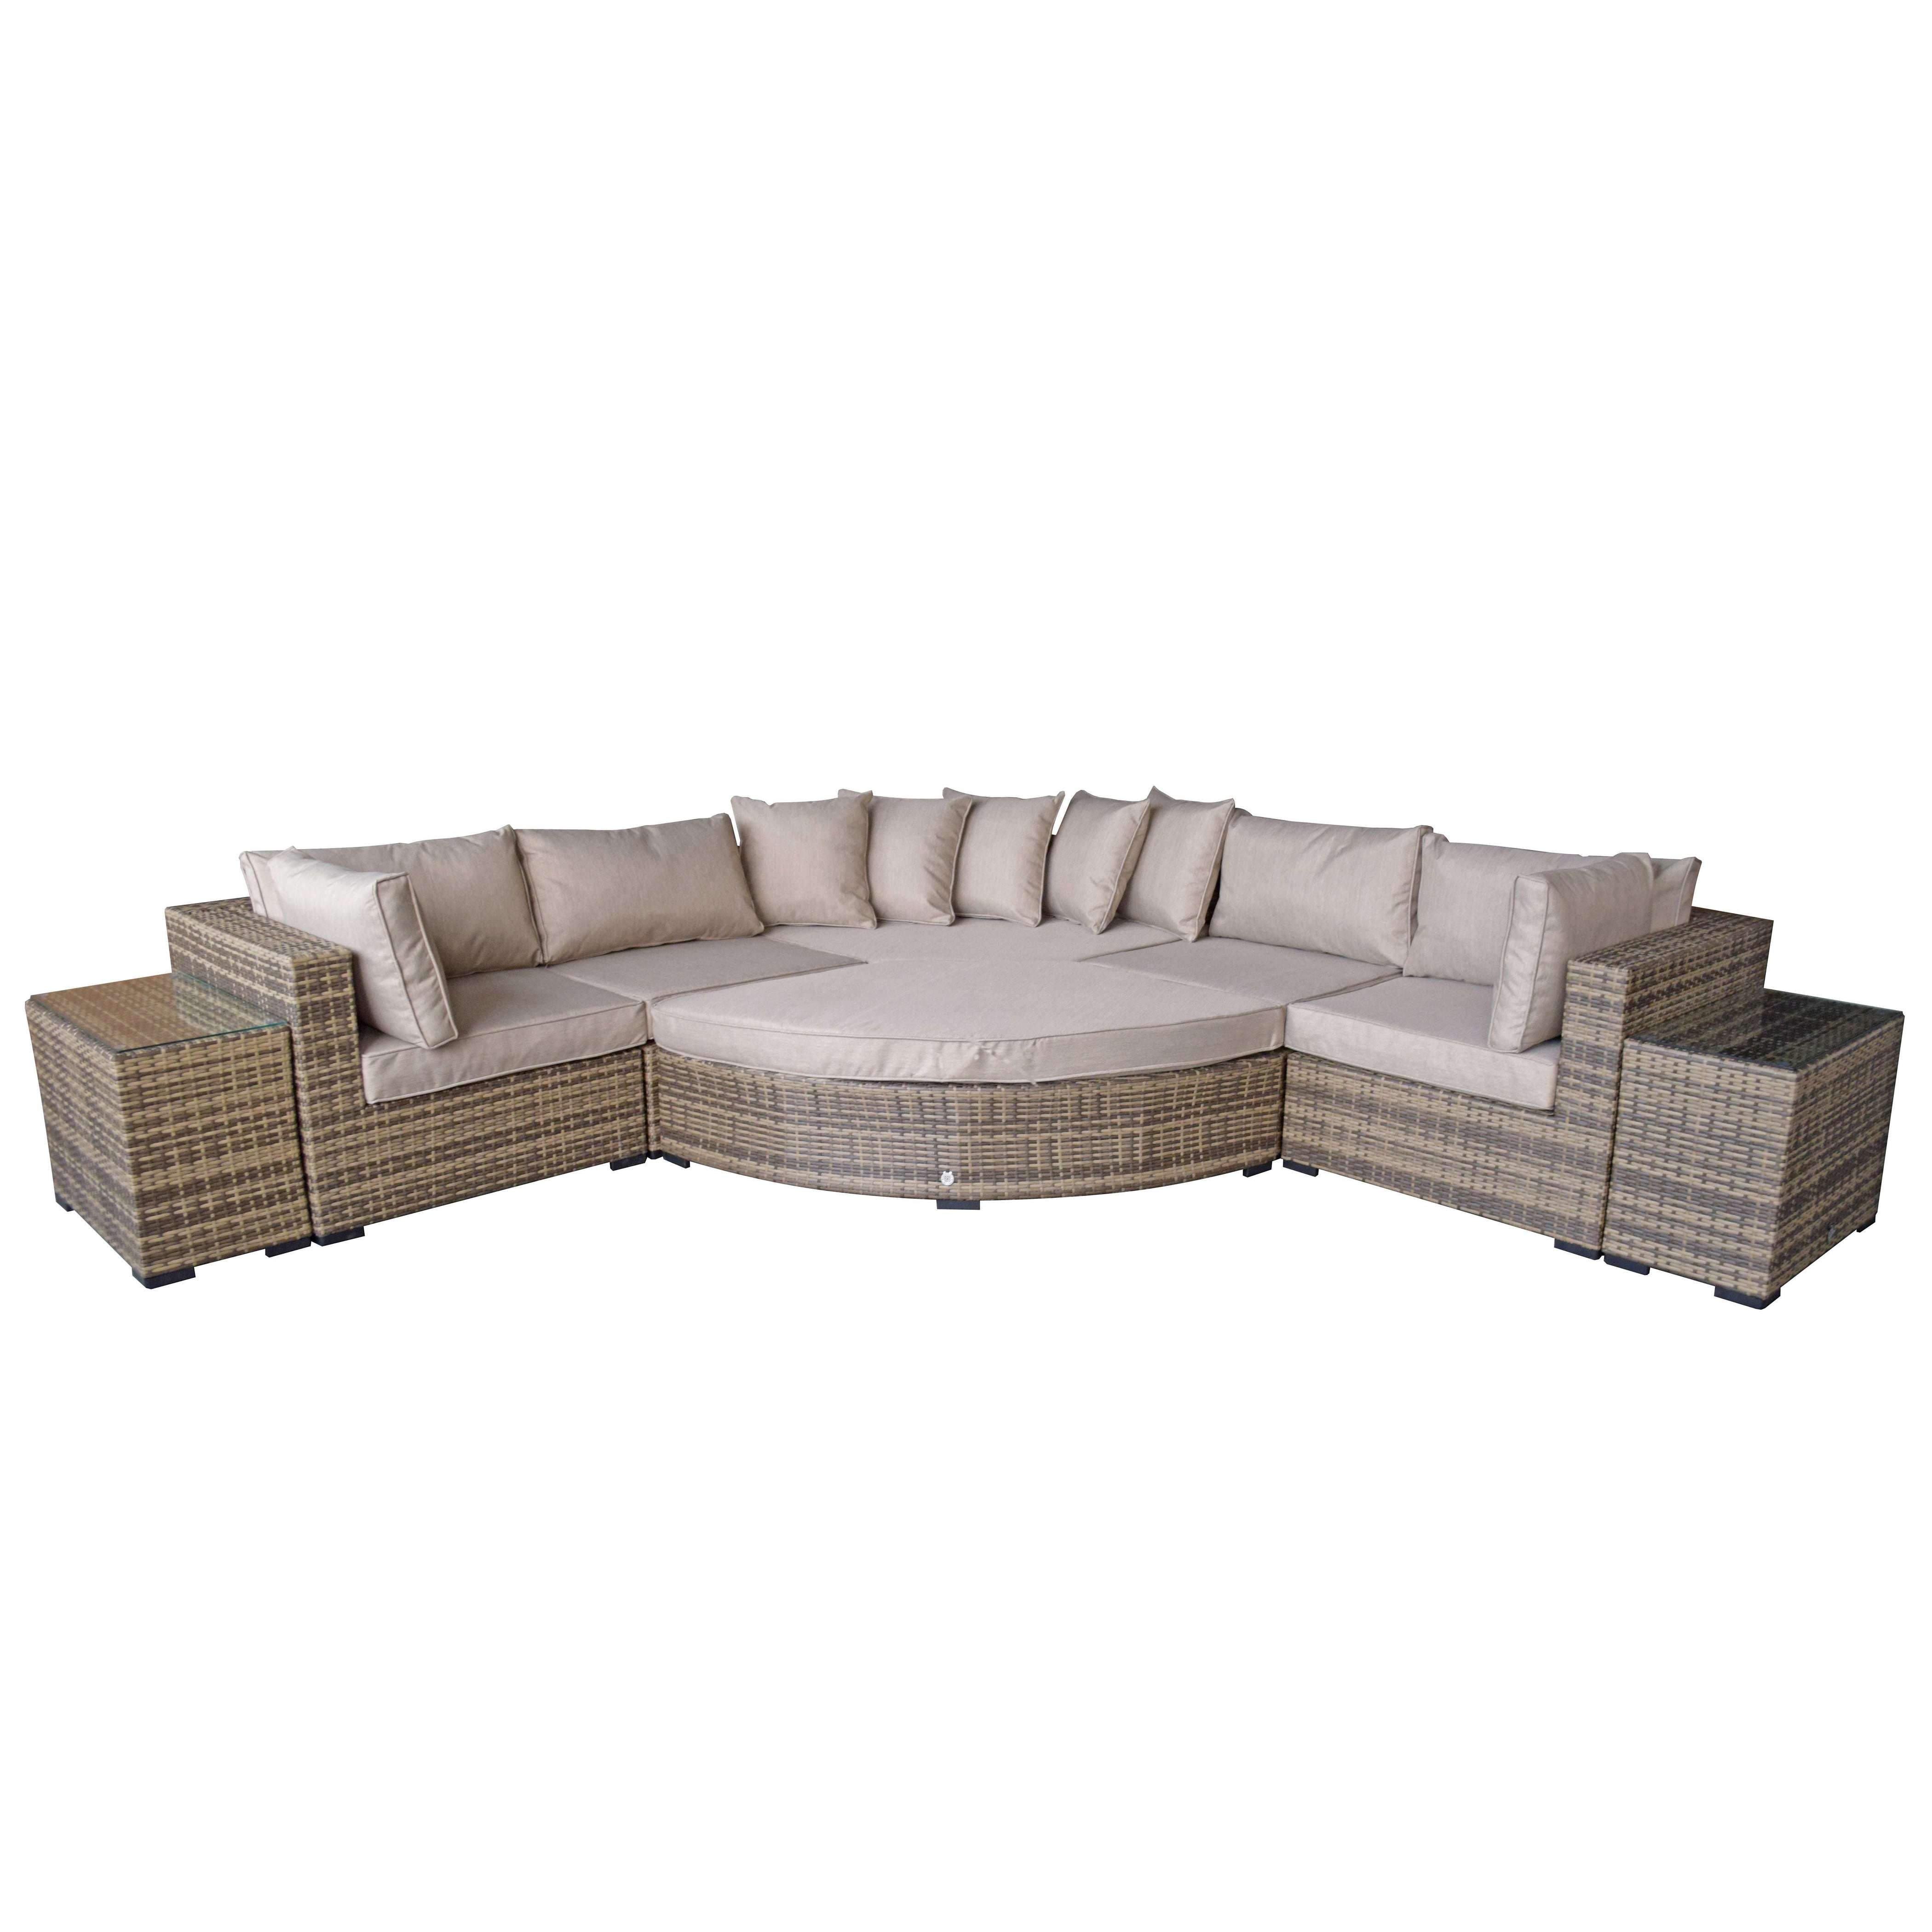 Exceptional Garden:Signature Weave Jessica Large Corner Sofa - Mixed Brown